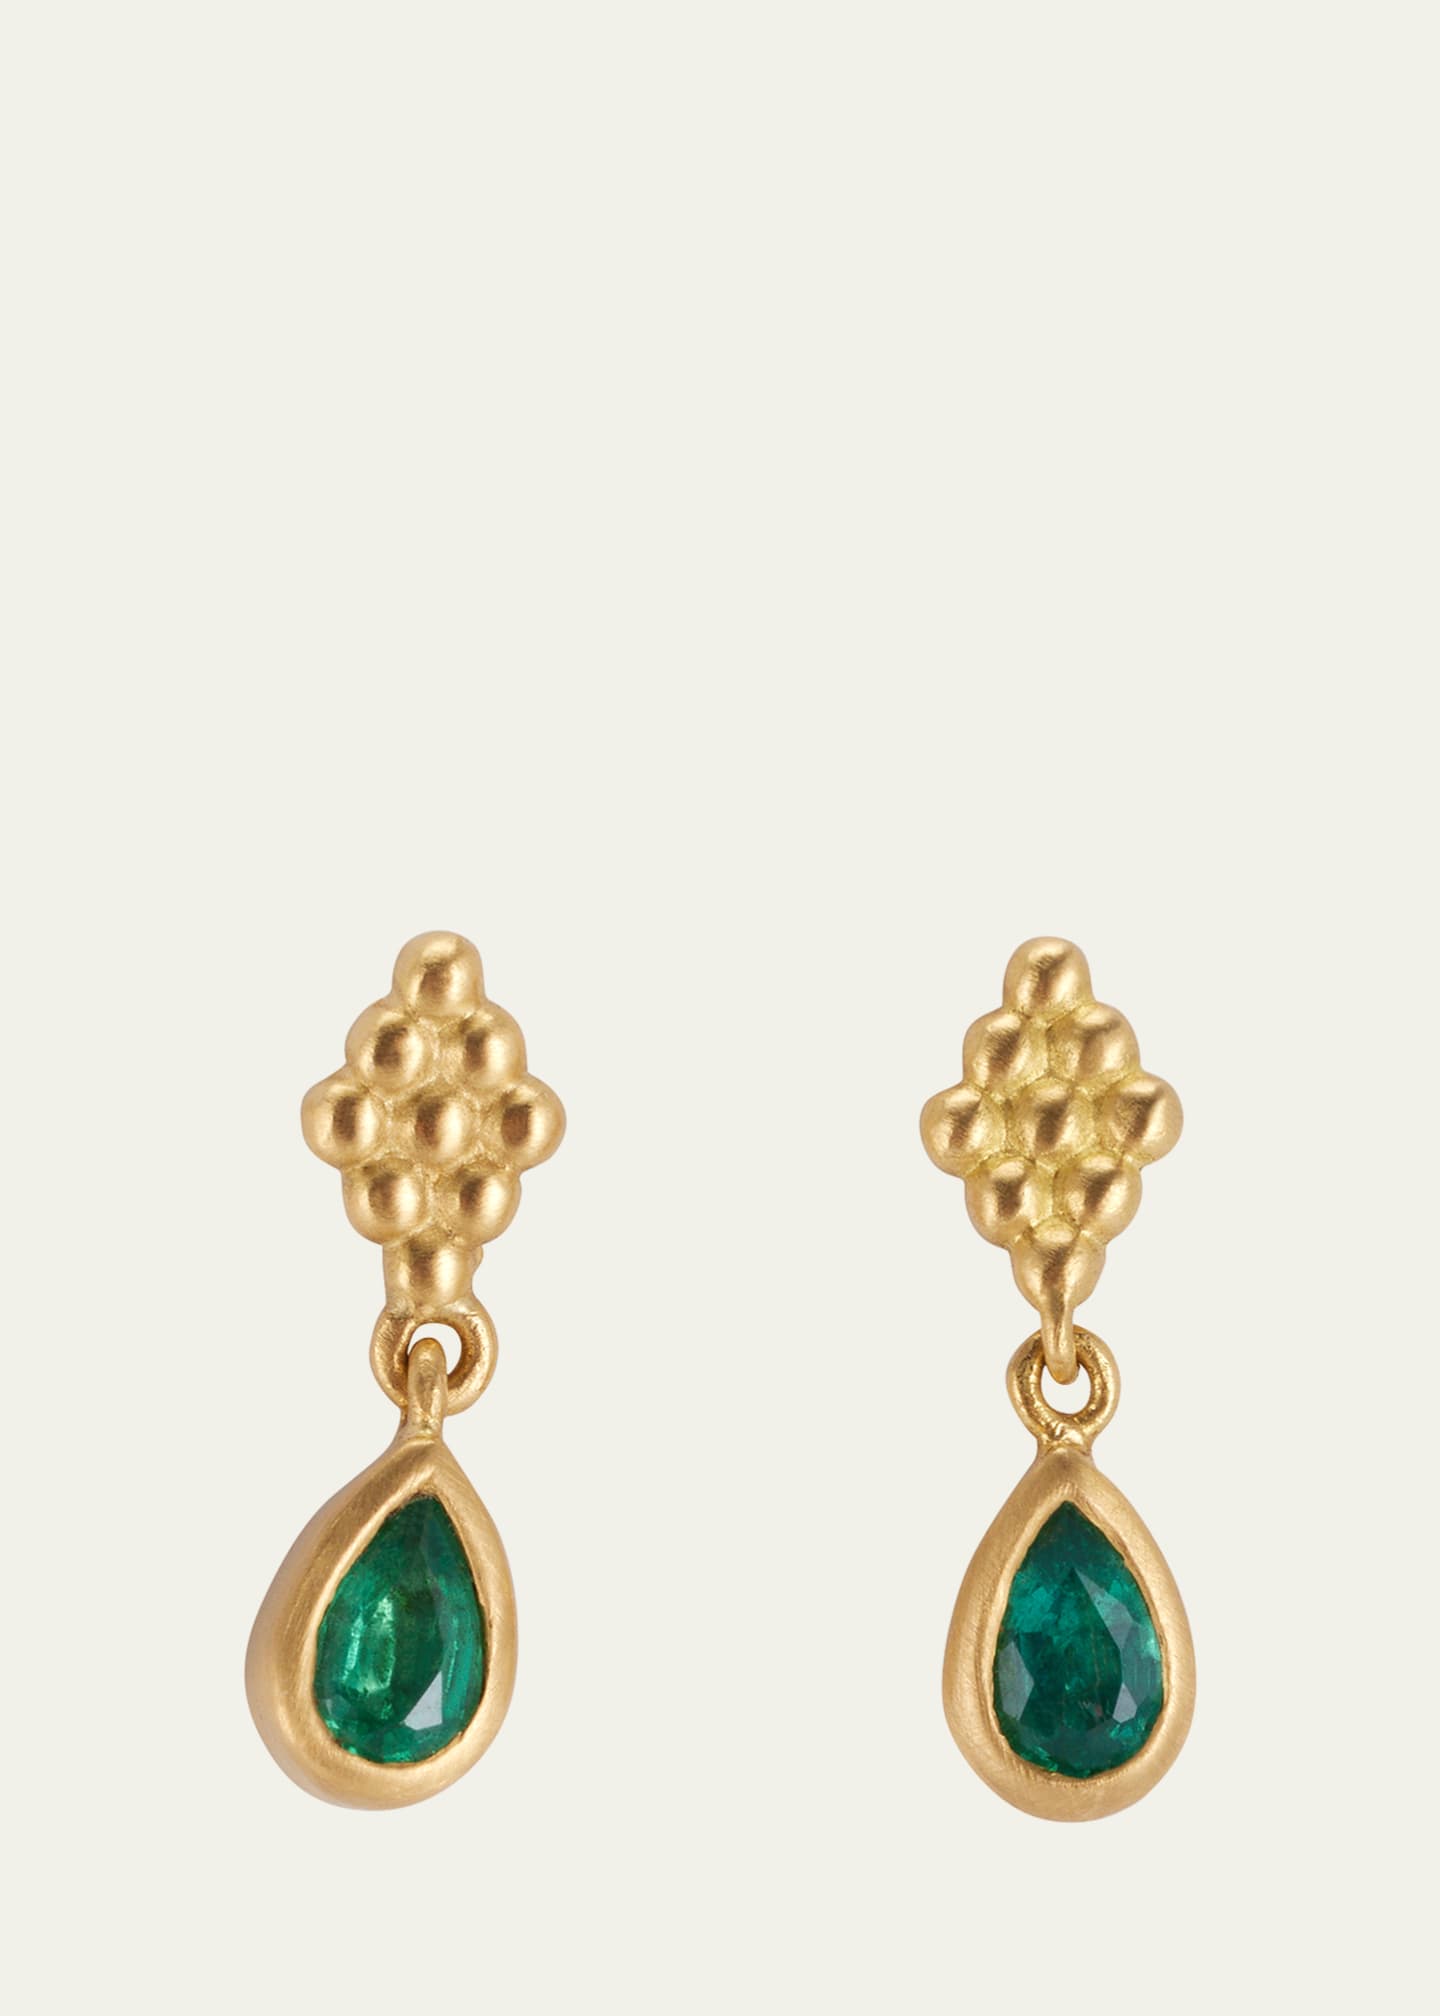 Prounis Jewelry Small Emerald Nona Earrings Image 1 of 4